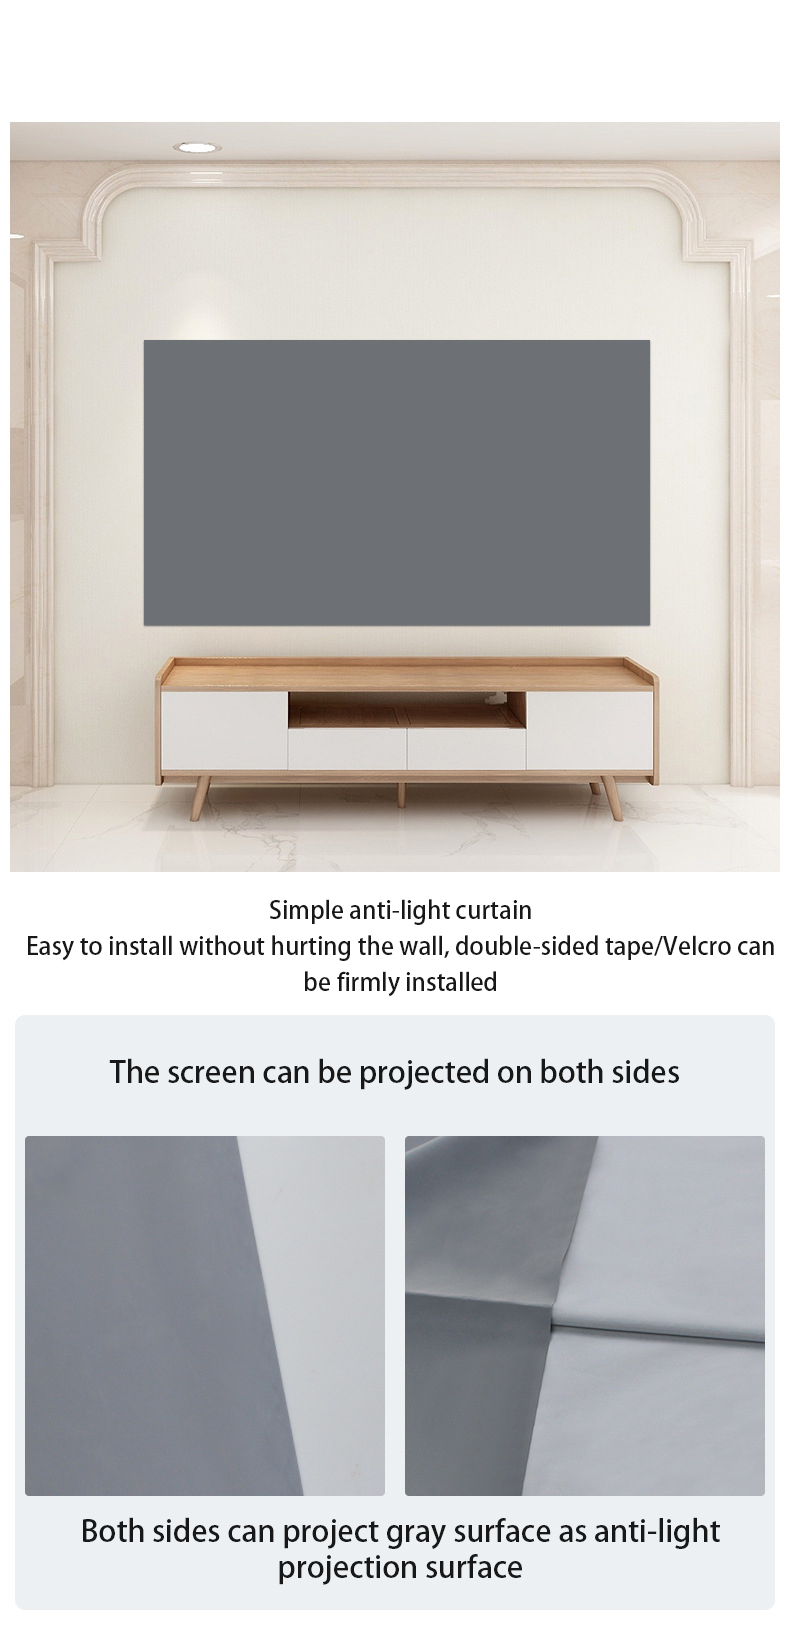 4K High-Definition Projector Screen 70-Inch 16:9 Metal Material Foldable Anti-light Curtain Simple Home Projector Portable Projector Screen